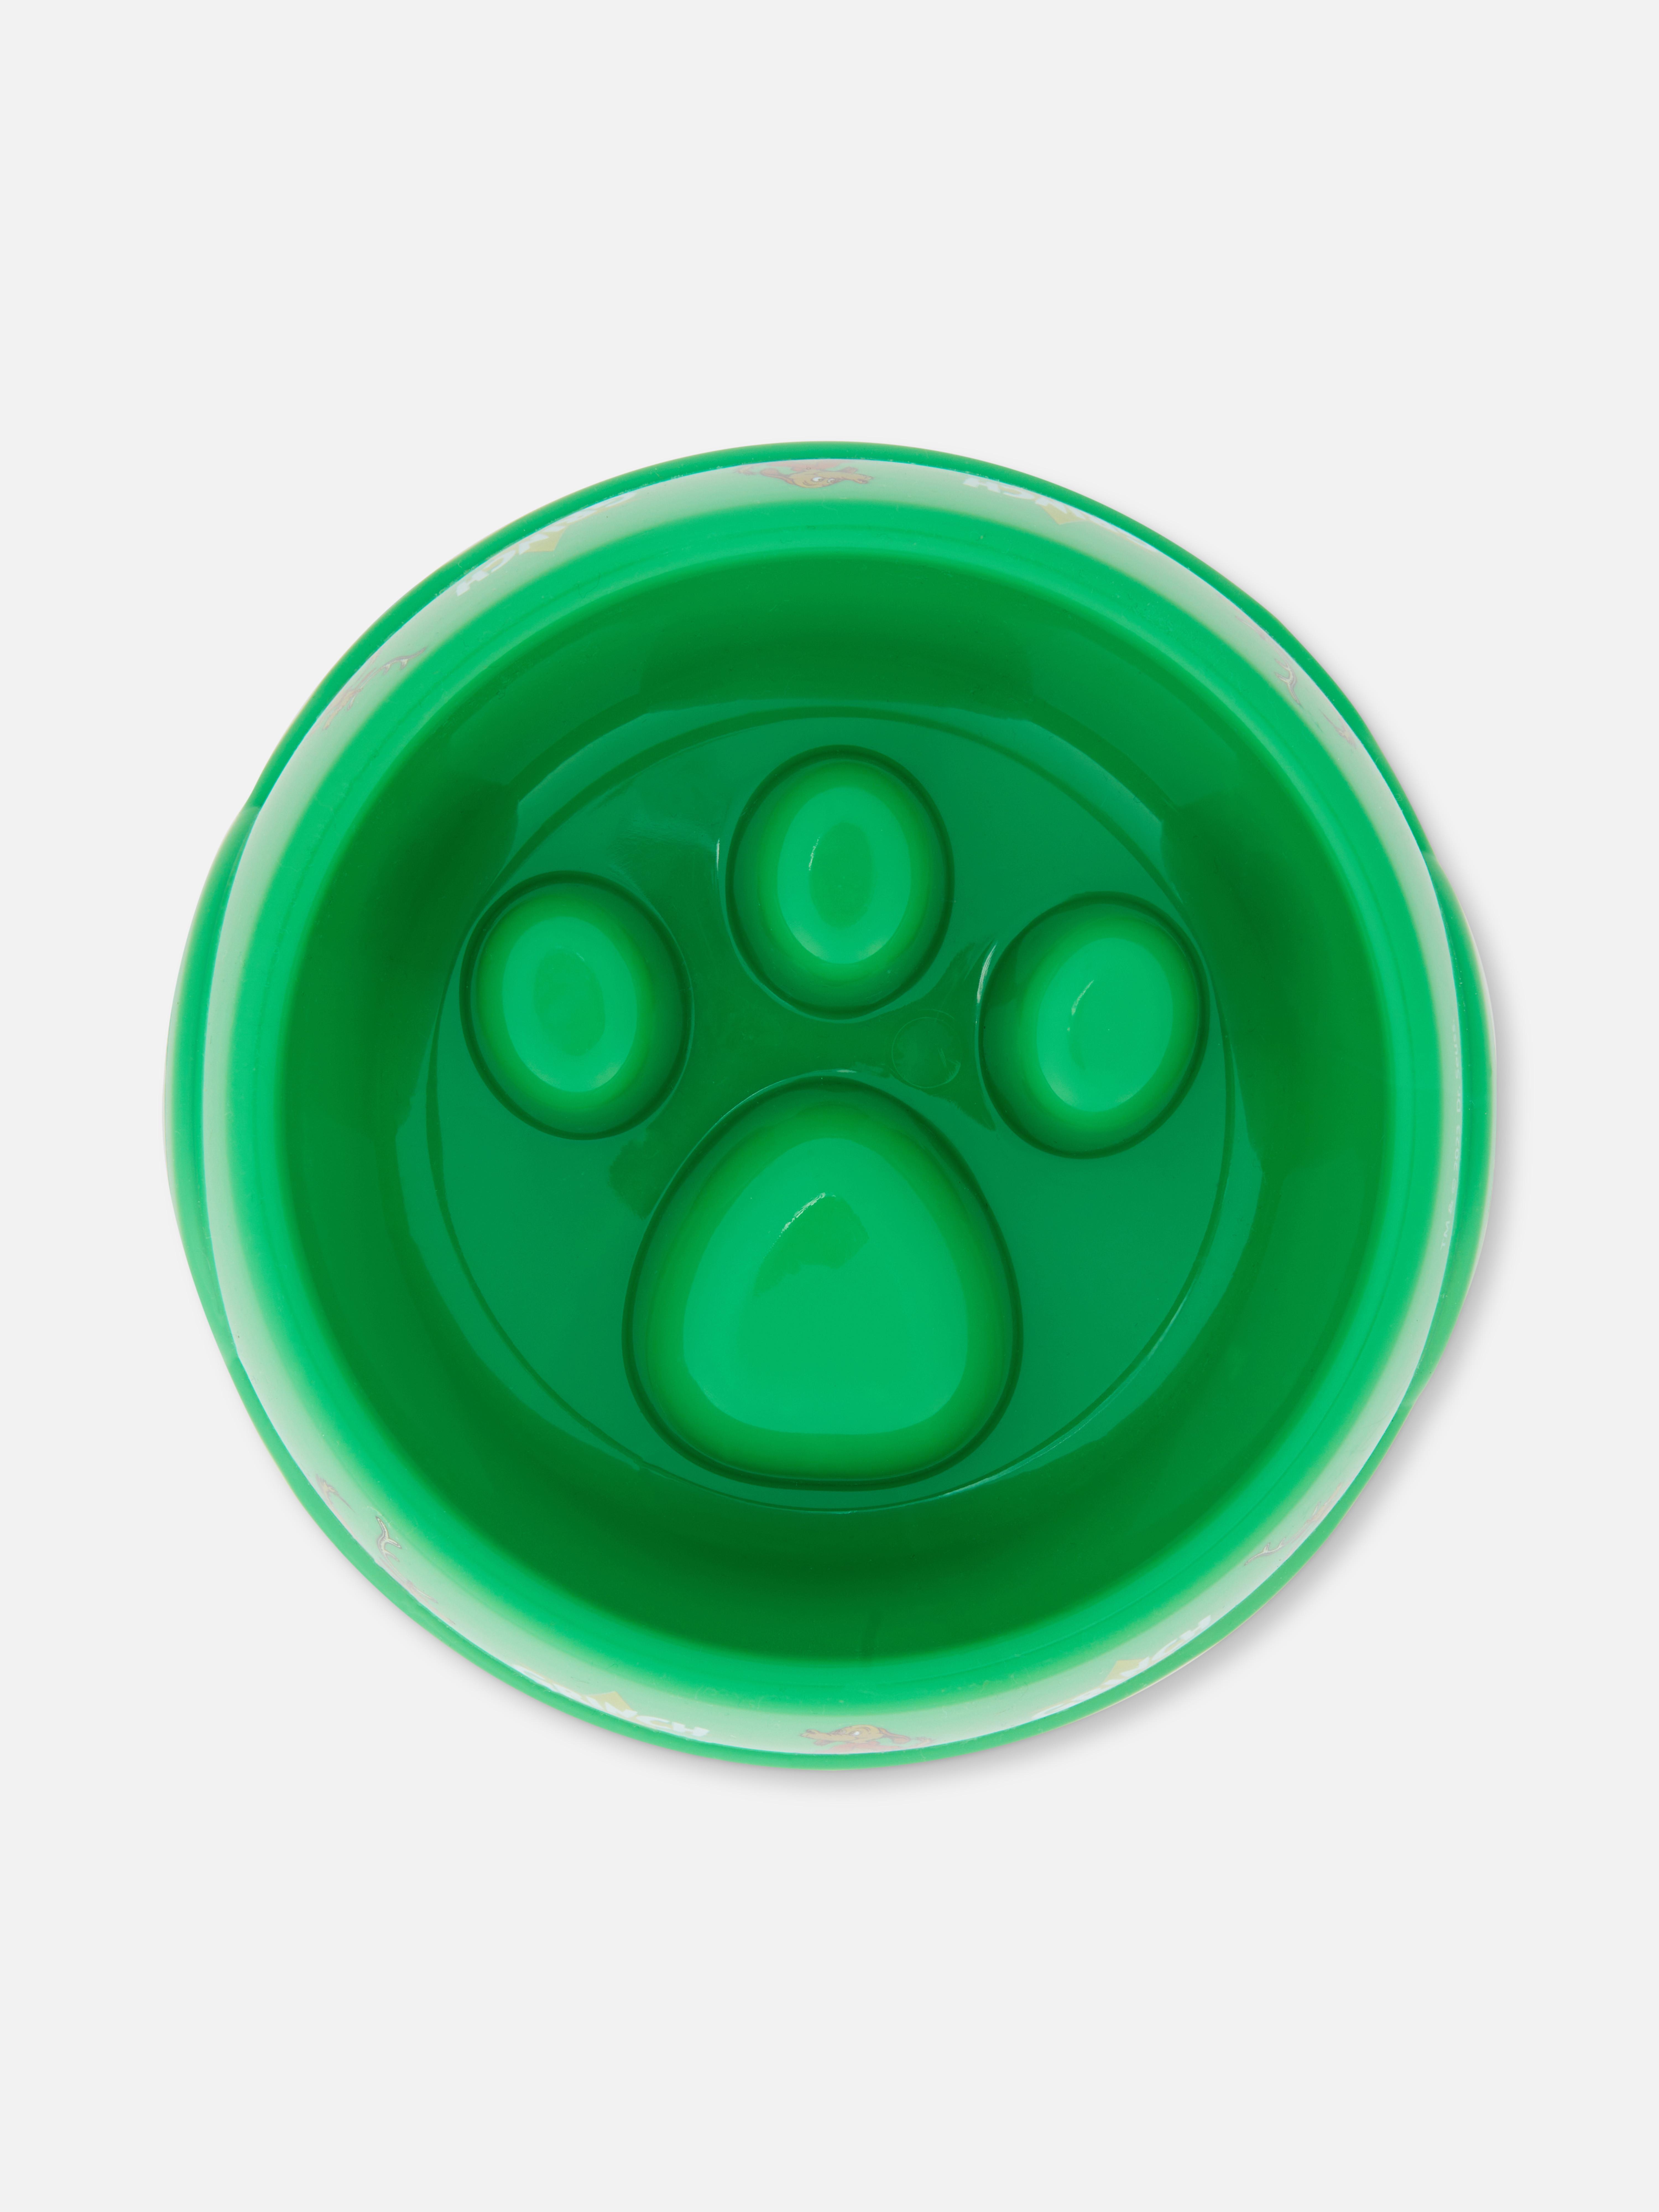 The Grinch Slow Feeder Pet Bowl